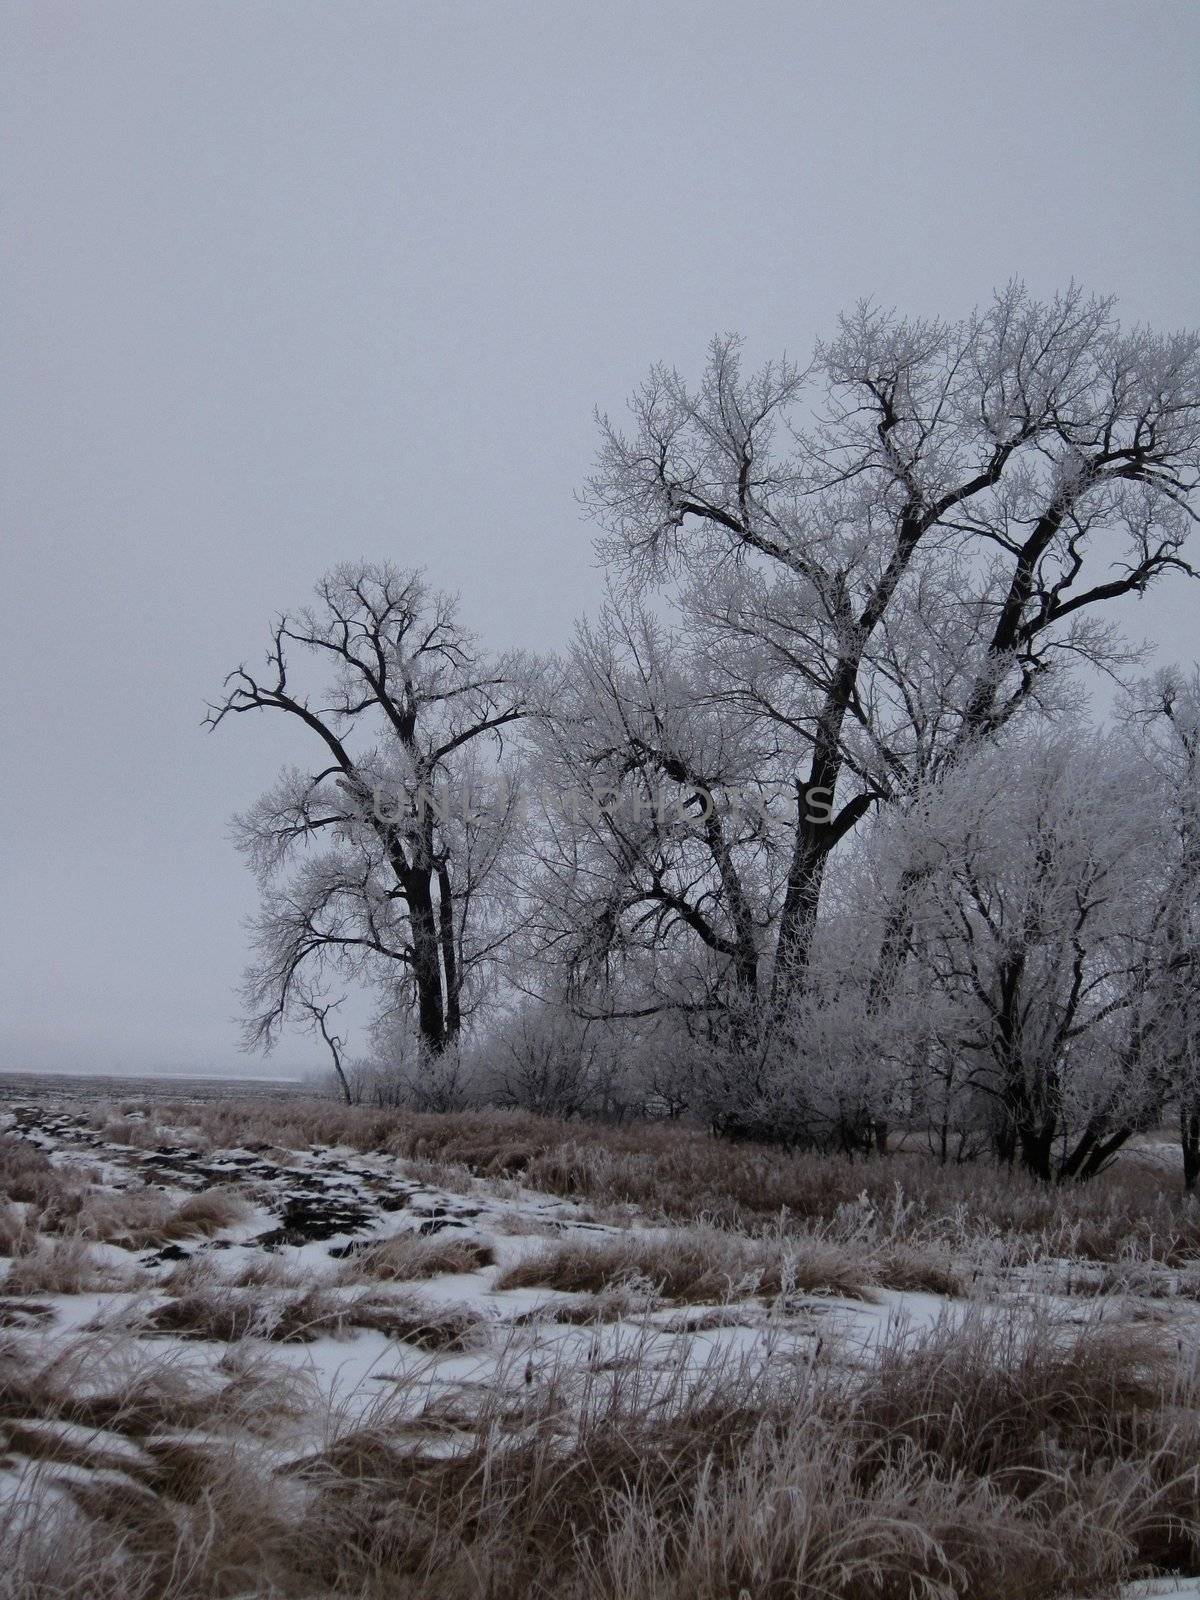 Hoar frost covered winter trees in a field.